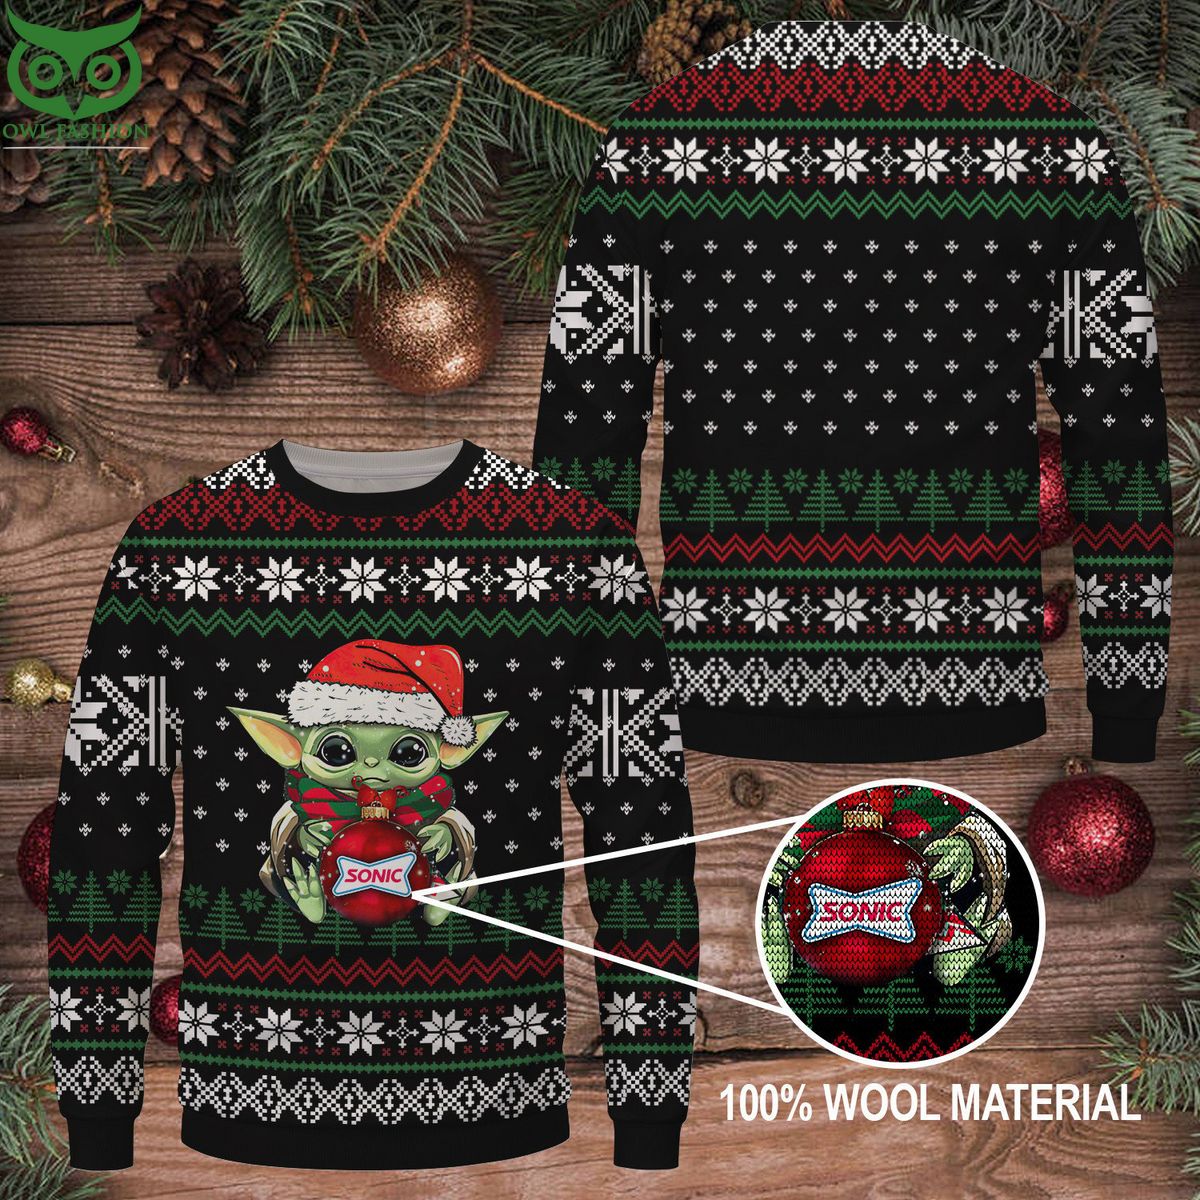 sonic drive in baby Yoda Premium Ugly Sweater The use of space is excellent.